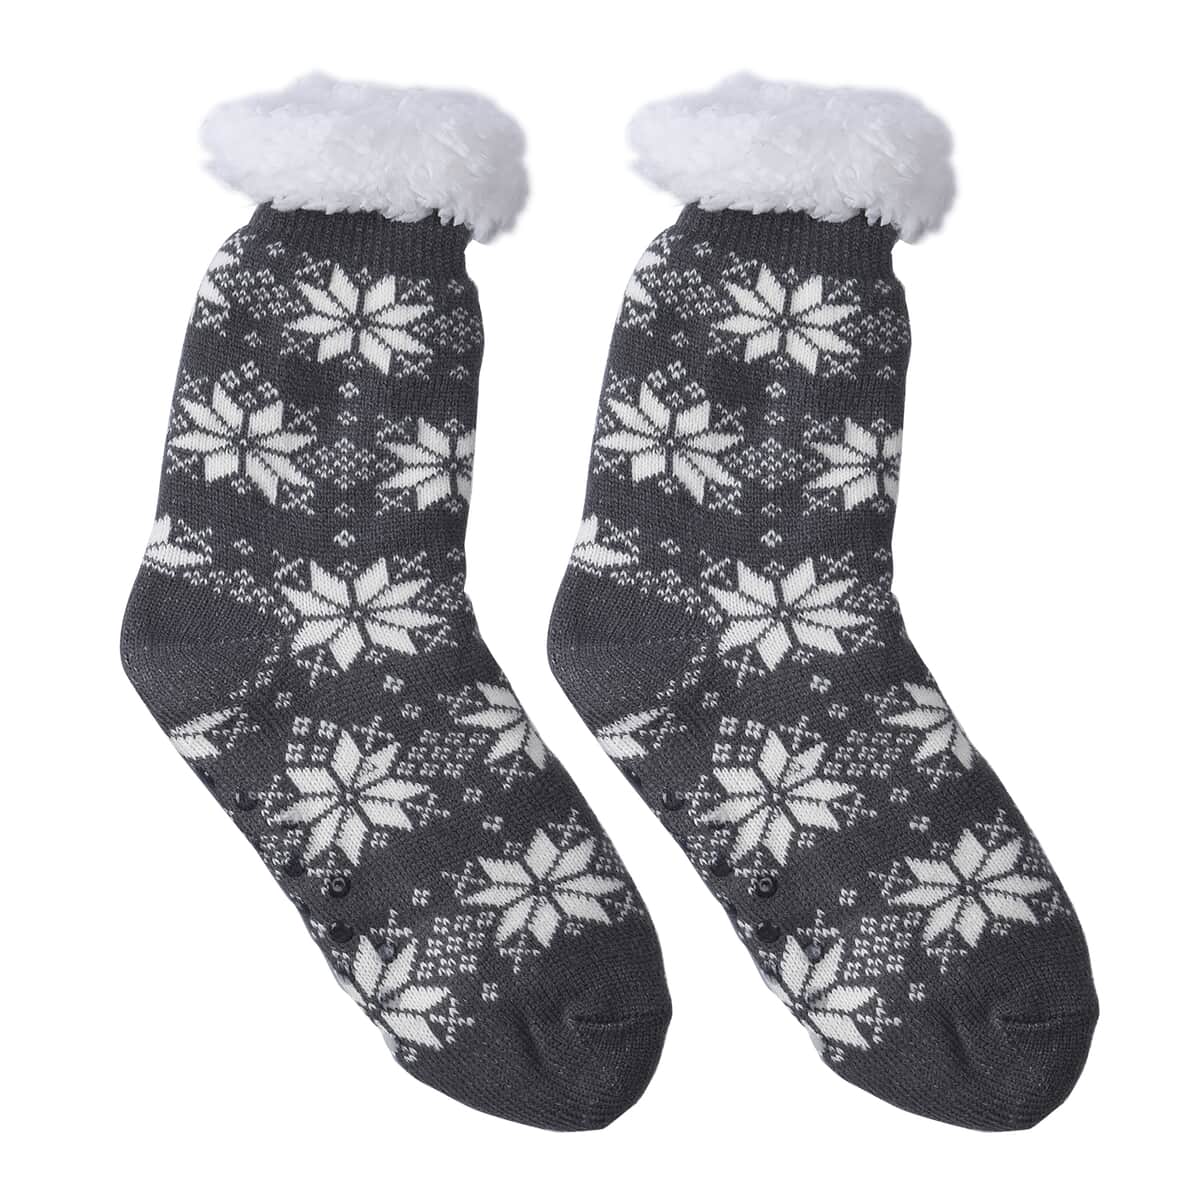 Homesmart Set of 2 Pairs White Snowflake and Navy Blue with Inside Sherpa Acrylic Knitted Socks image number 3